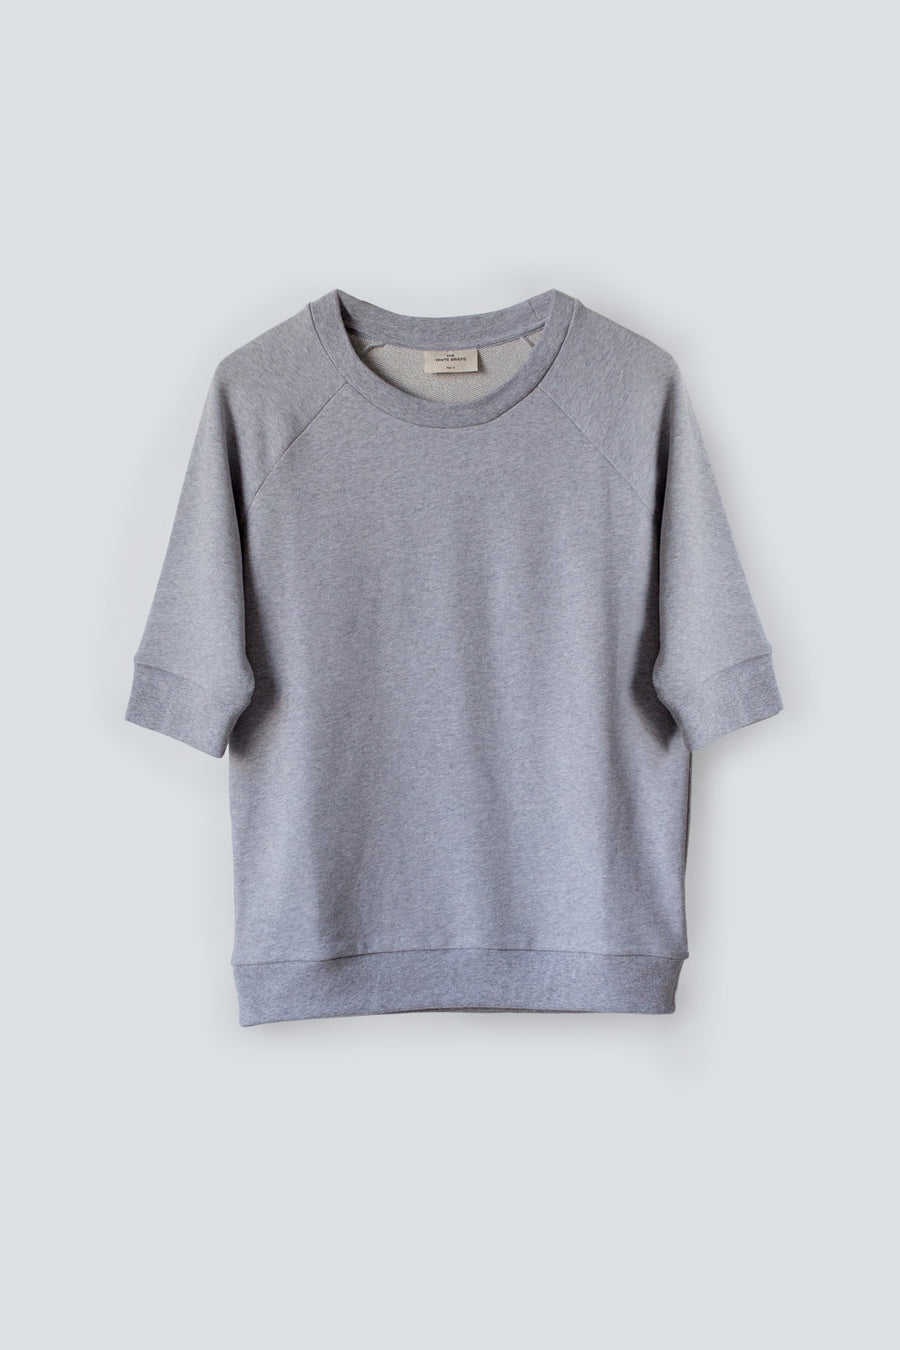 Relaxed fit women's grey sweatshirt with 3/4 length sleeves and made from a soft 100% organic cotton terry